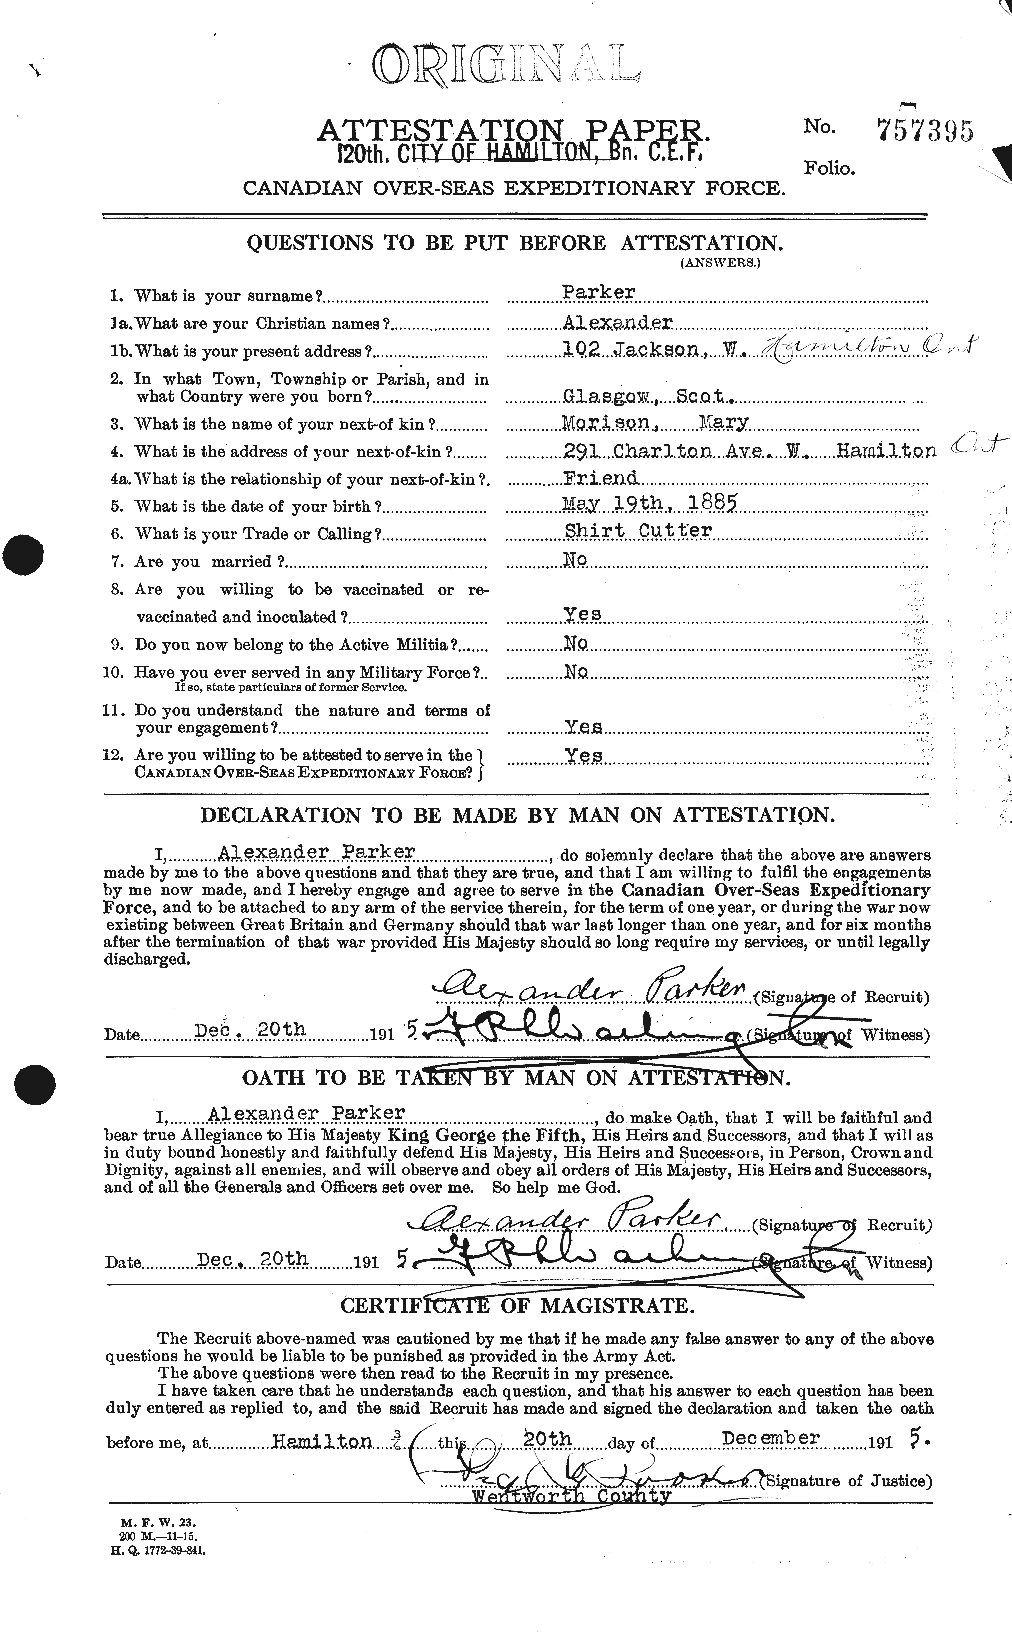 Personnel Records of the First World War - CEF 564971a